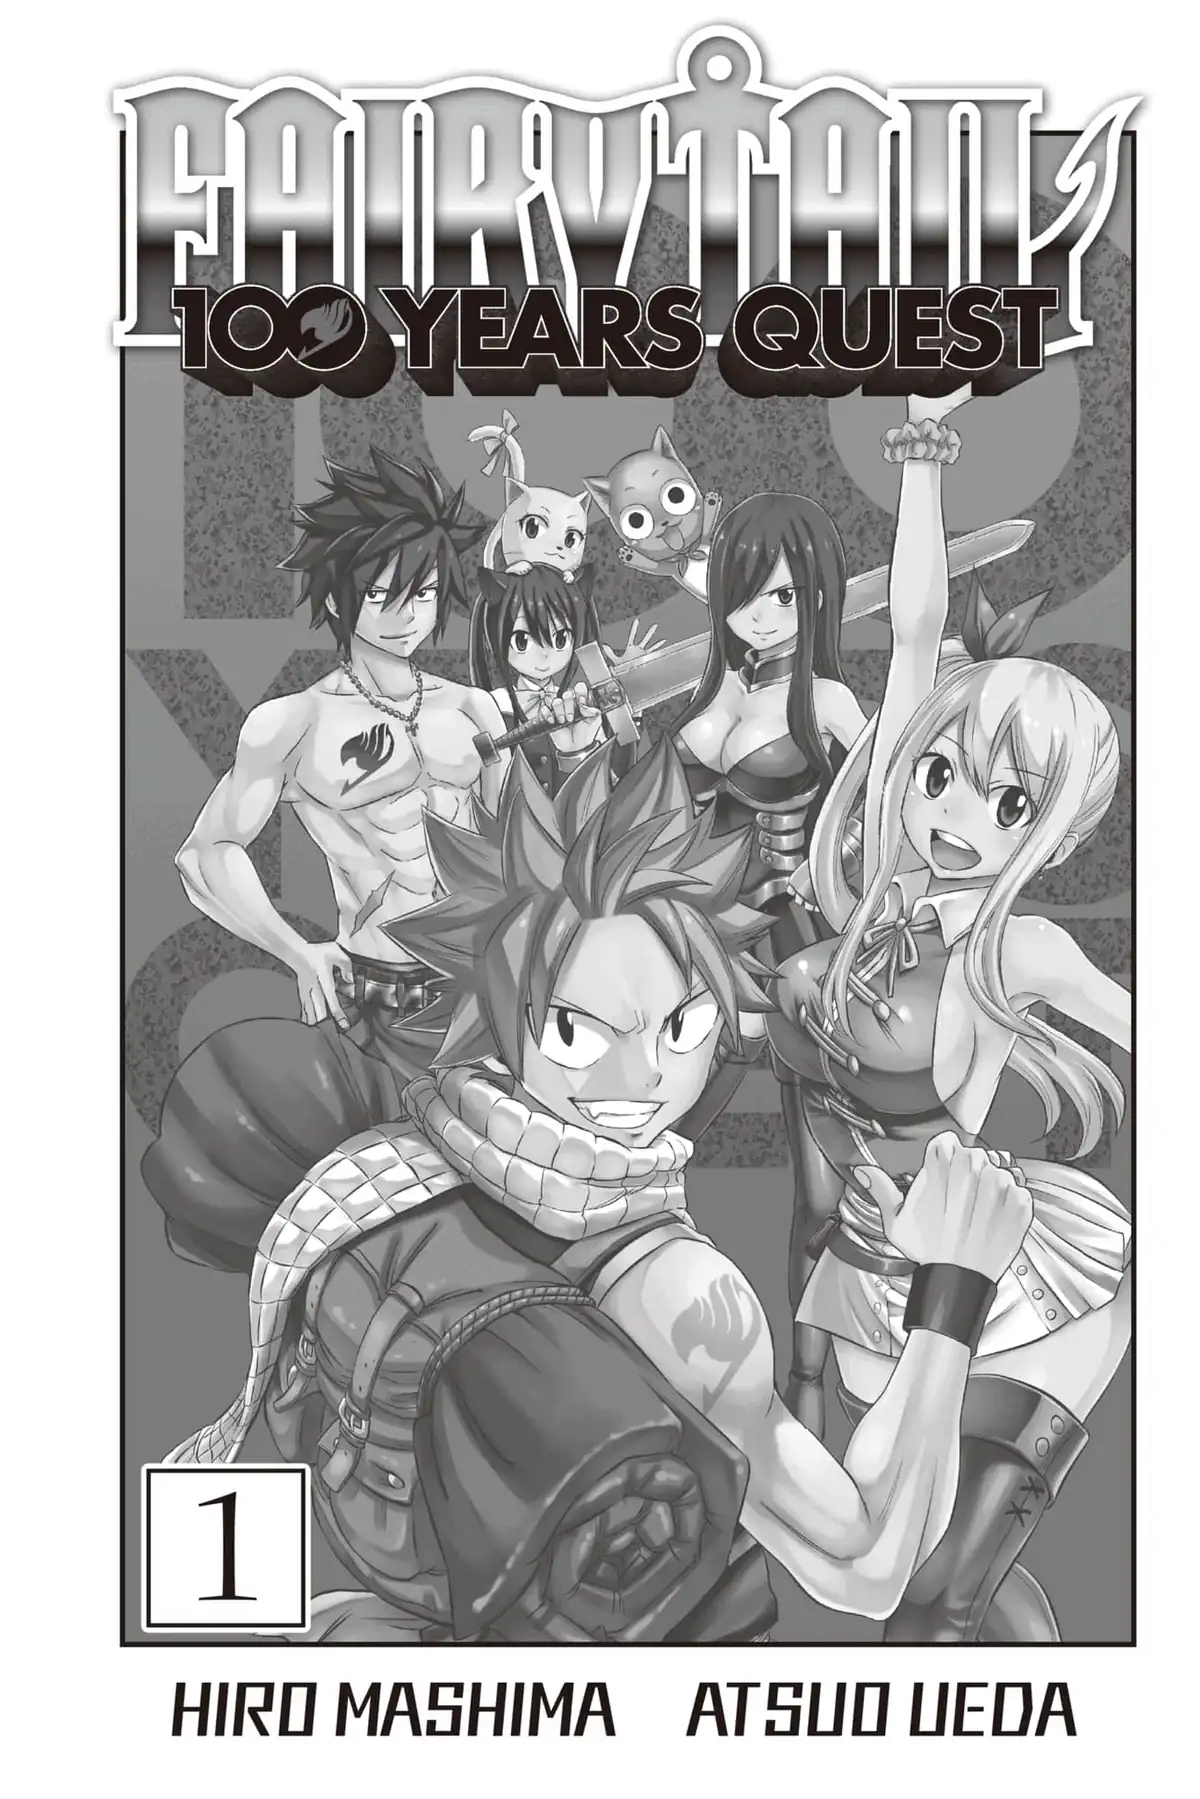 Get a jump on FAIRY TAIL: 100 Years Quest manga before the anime debuts!  Save up to 50% off with our Manga Matsuri: Fun in the Sun digital sale.  Ends